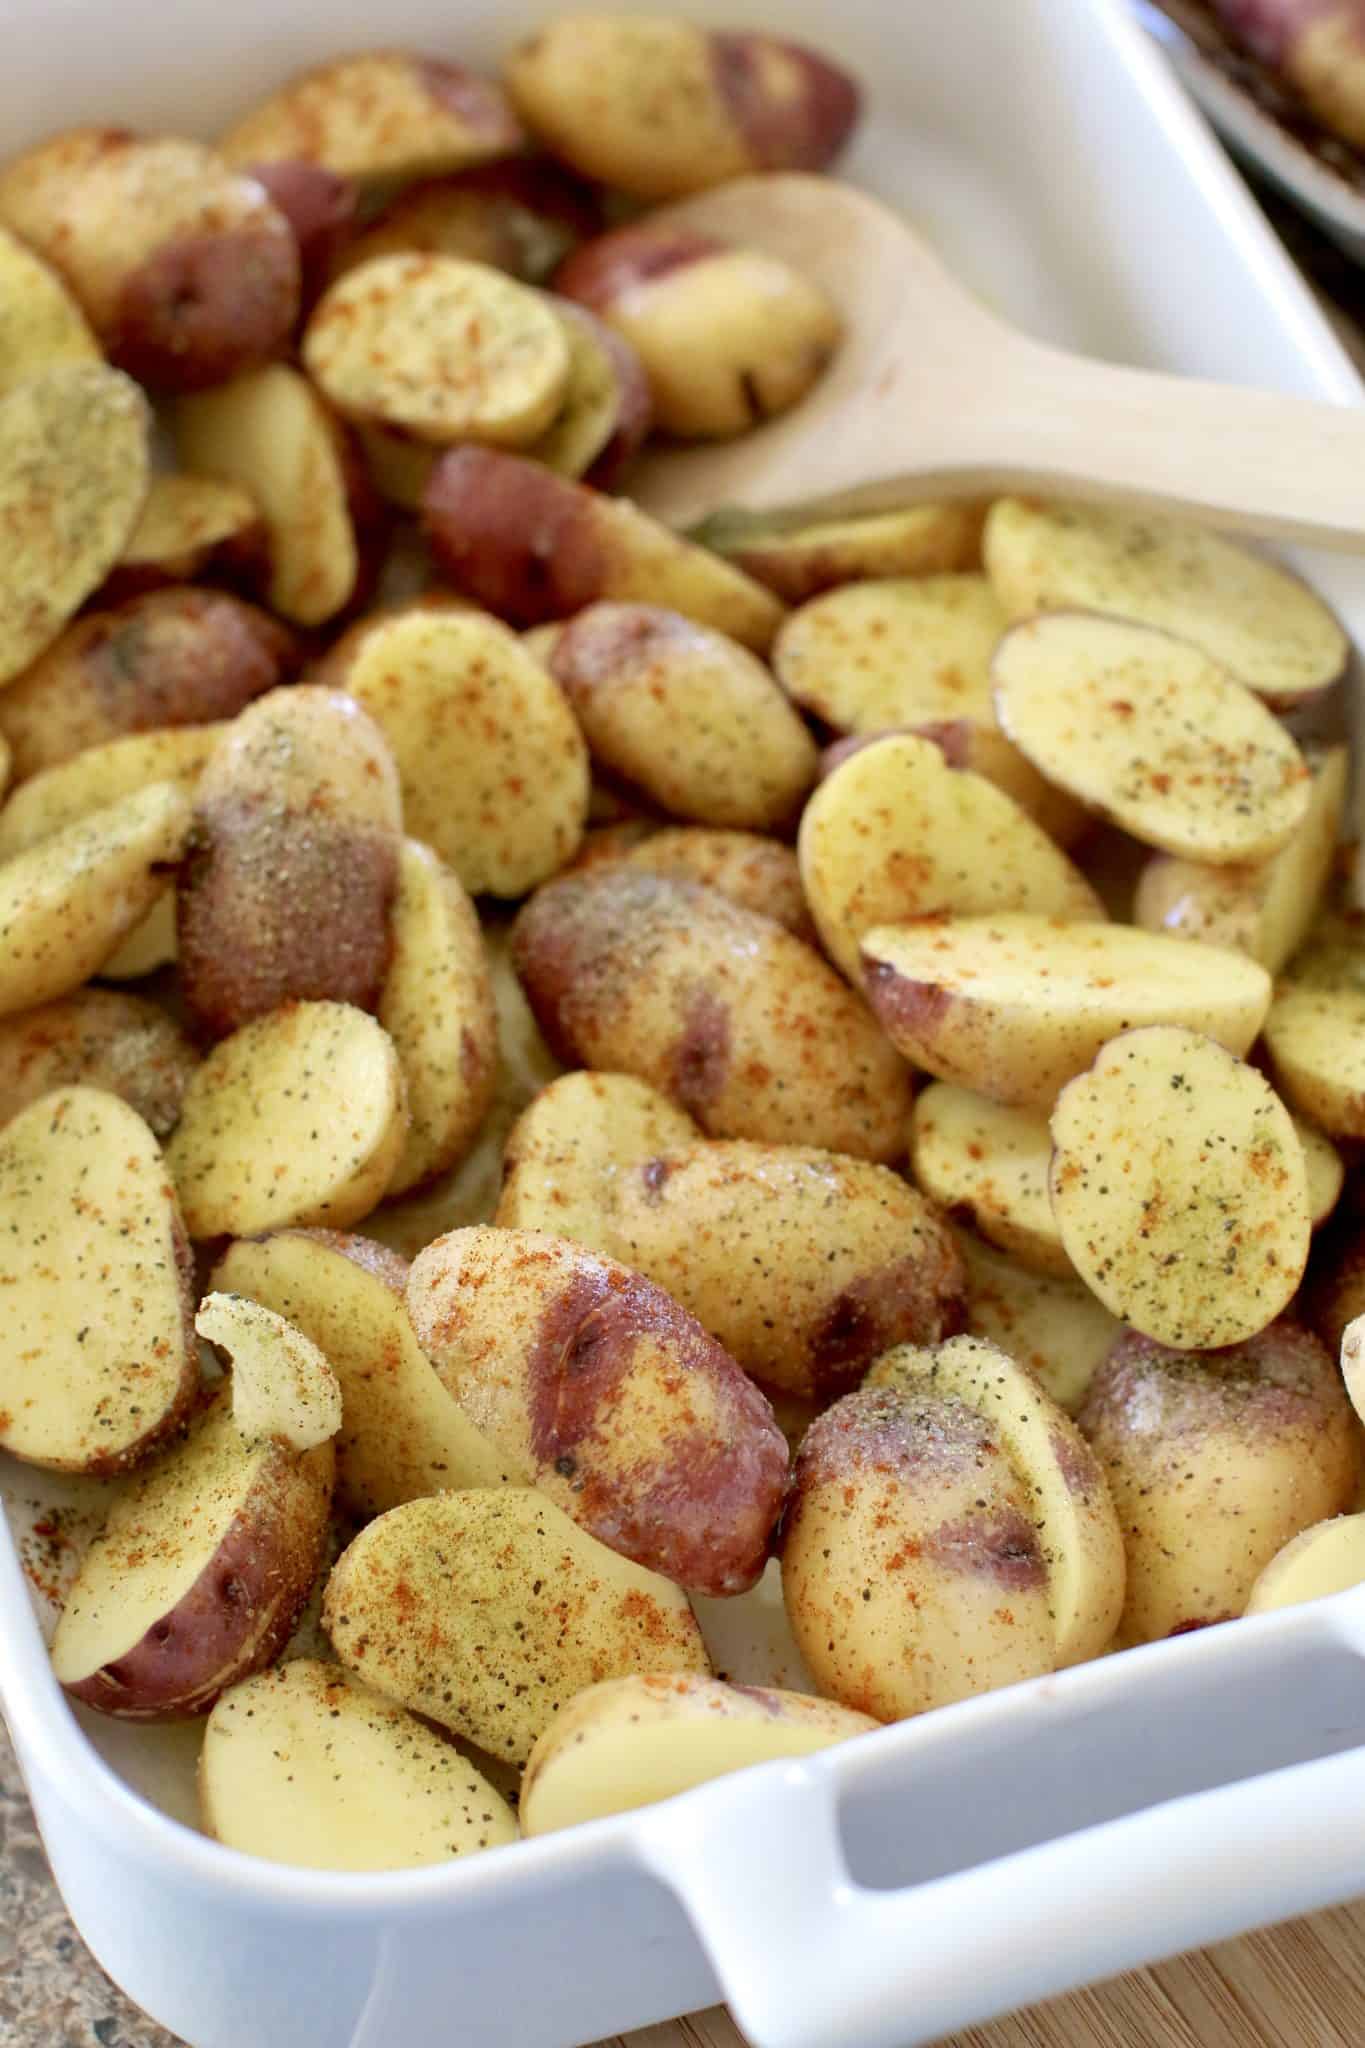 Greek seasoning shown sprinkled over sliced potatoes in a white baking dish and a wooden spoon on the side. 